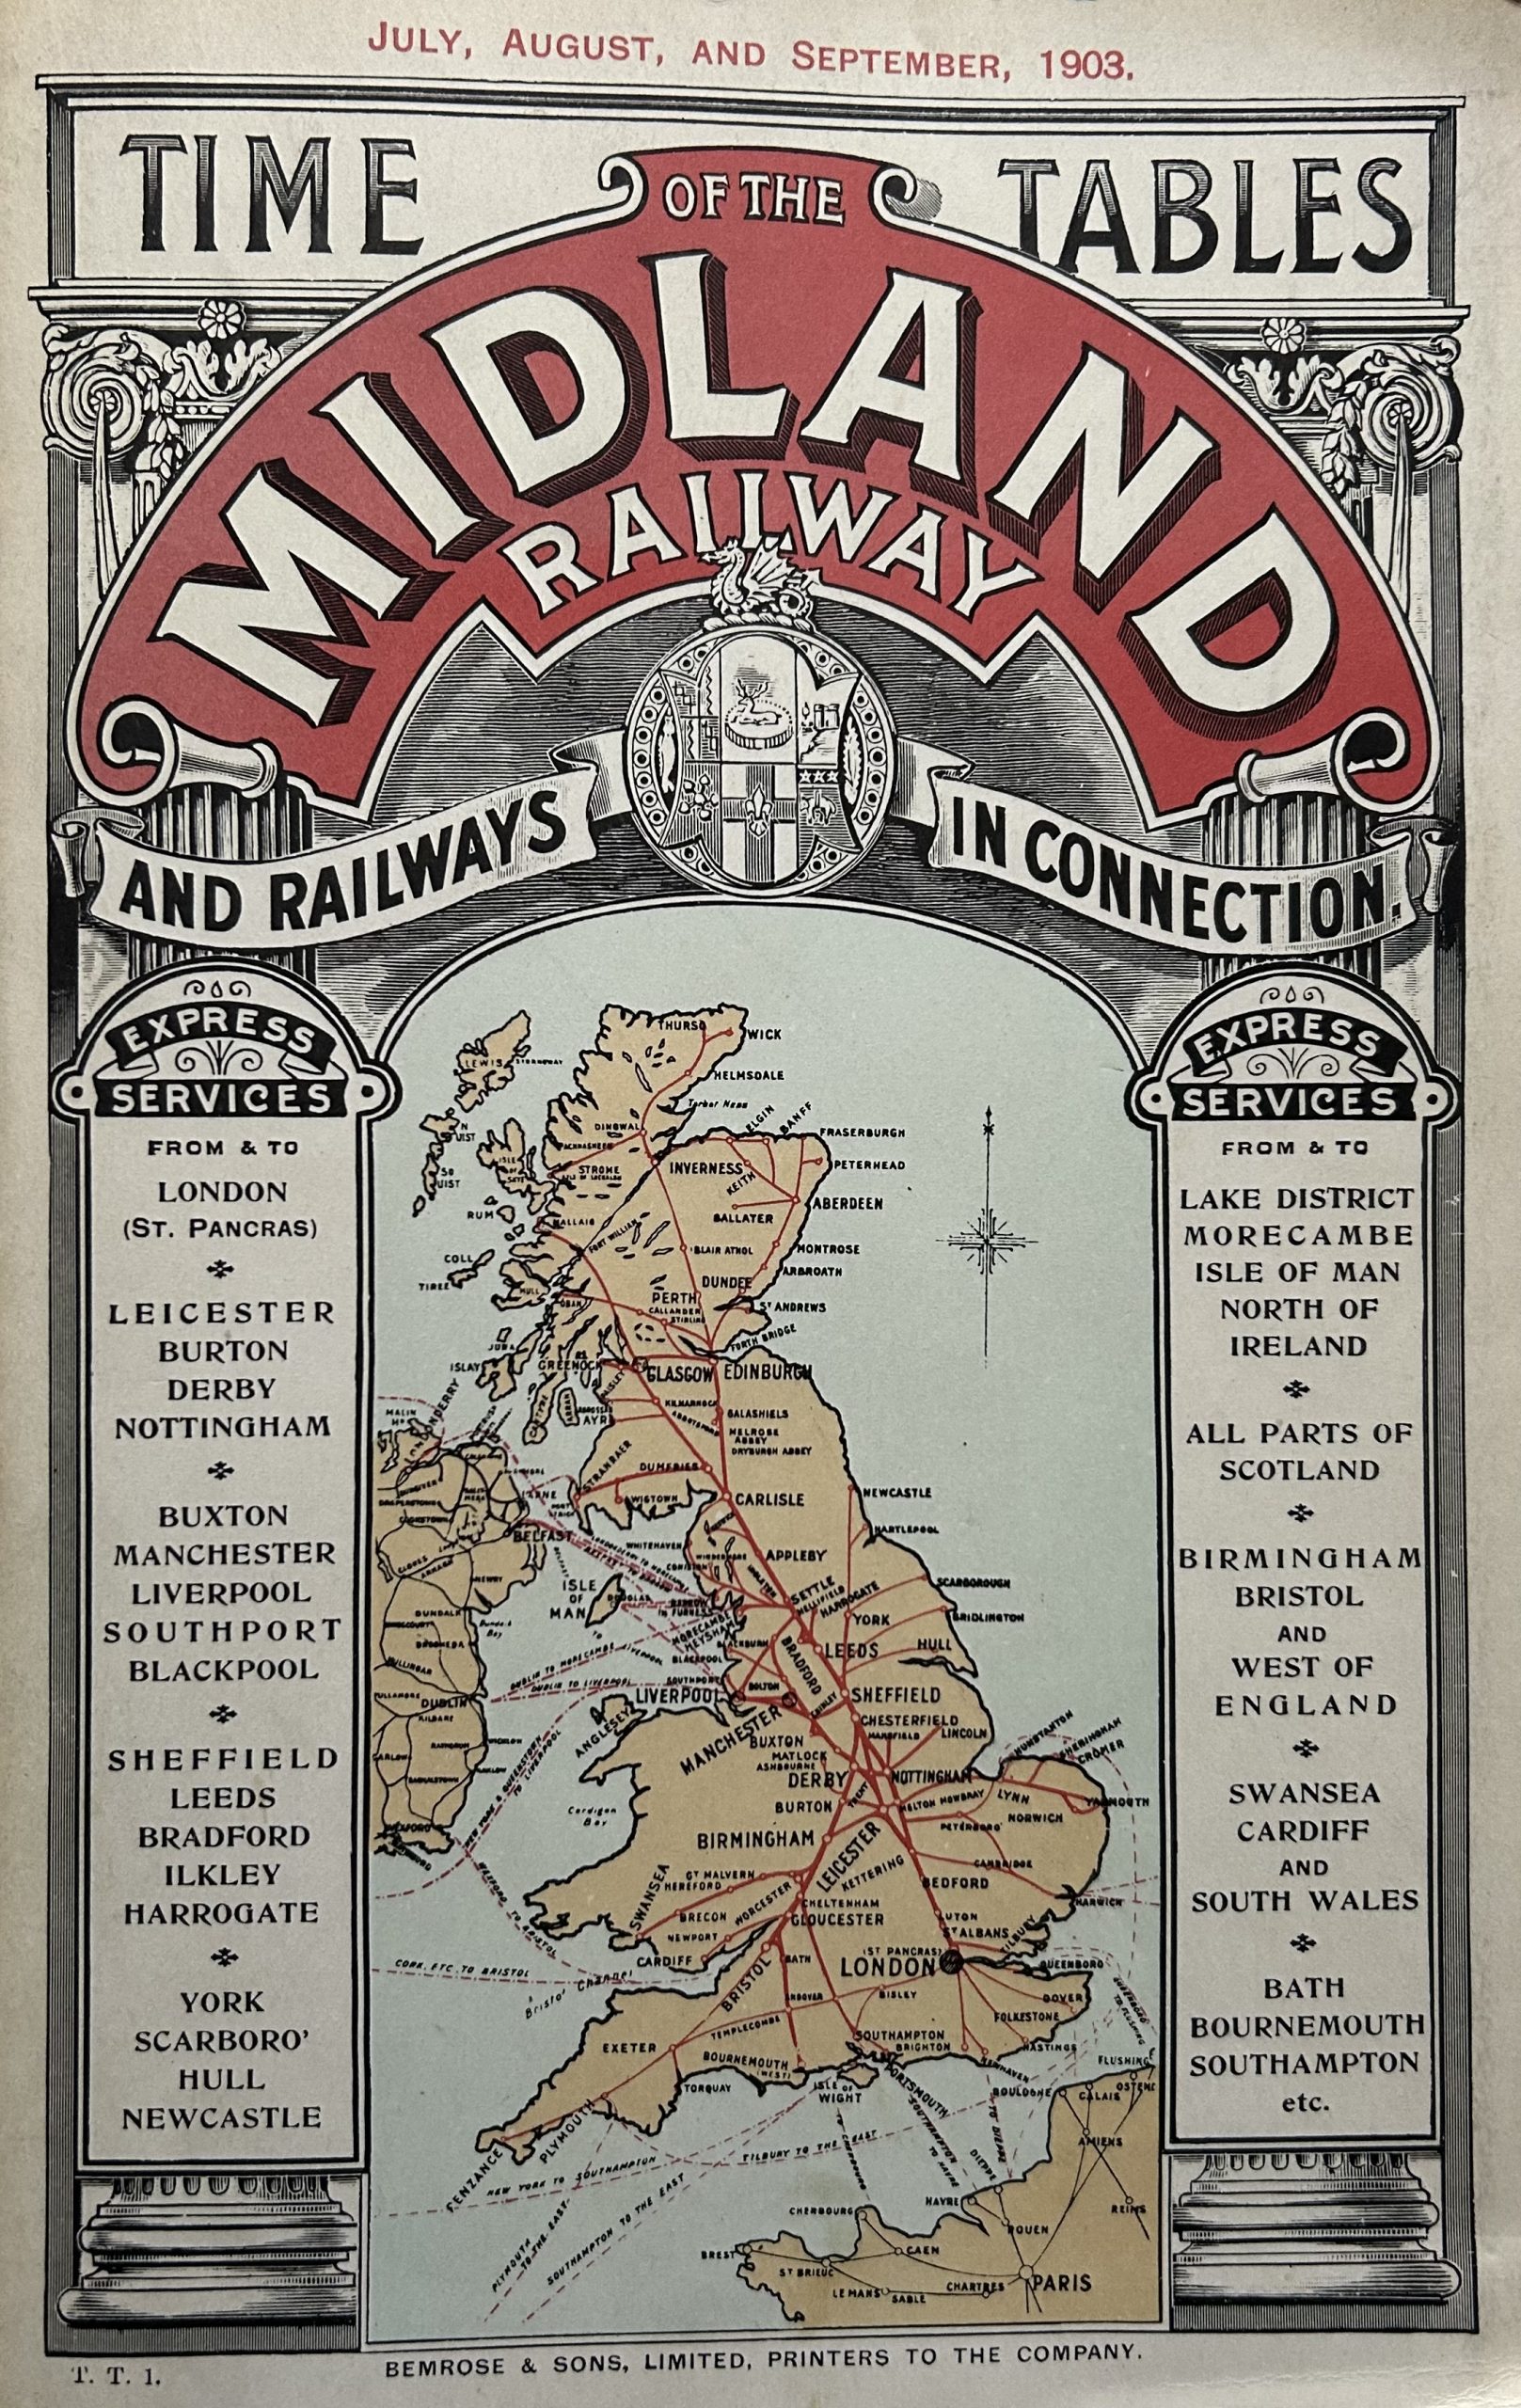 Timetables of the Midland Railway and Railways in Connection: July, August, and September 1903